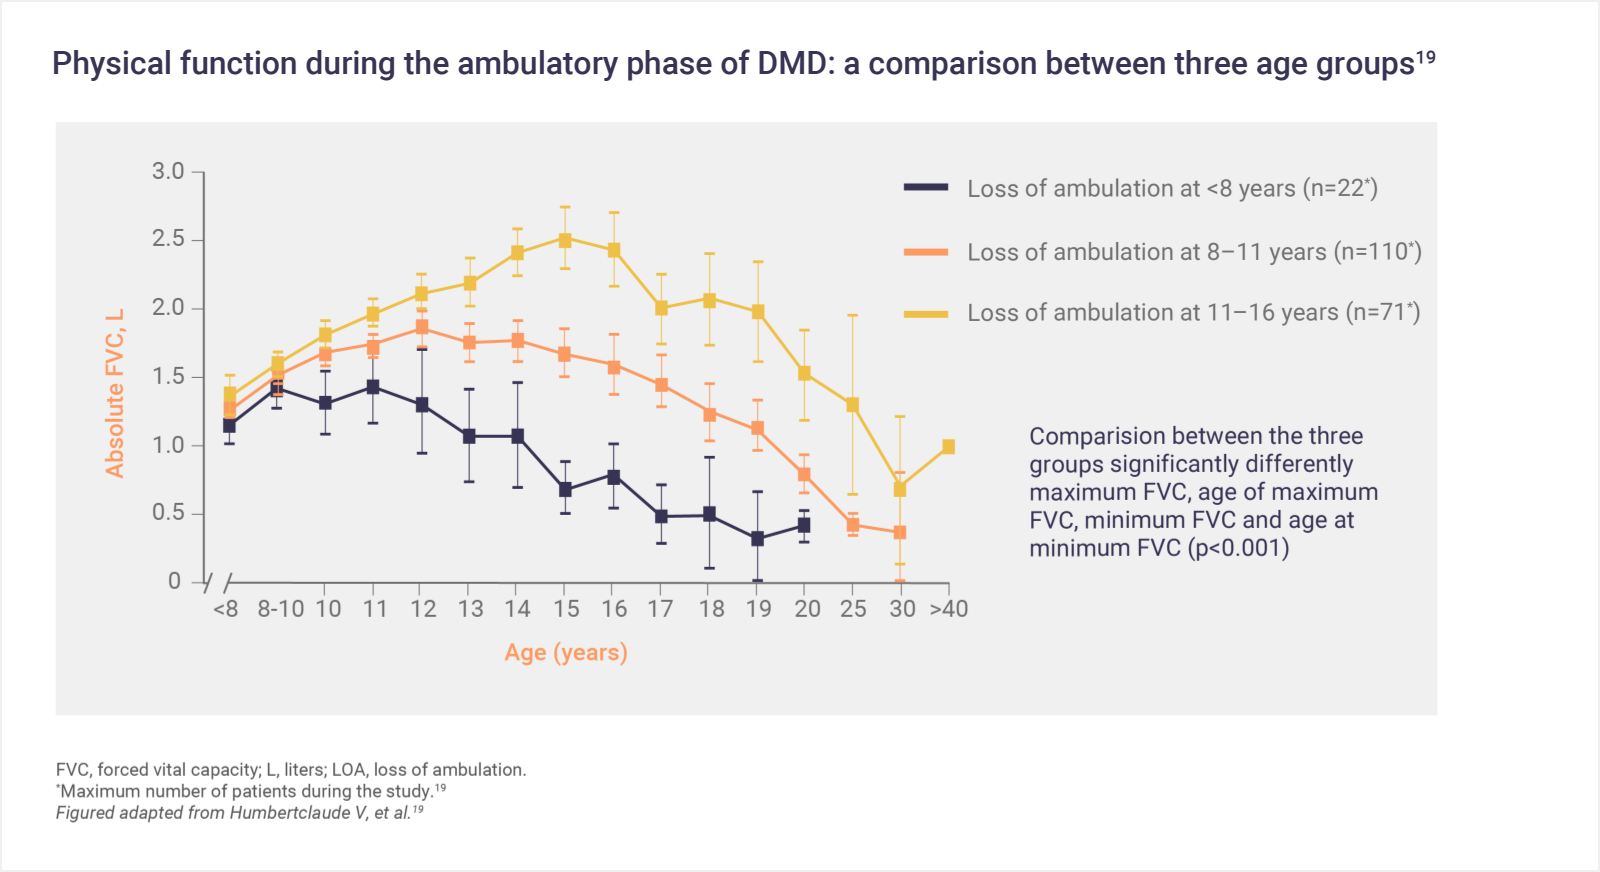 Infographic: Physical function during the ambulatory phase of DMD: A comparison between 3 age groups